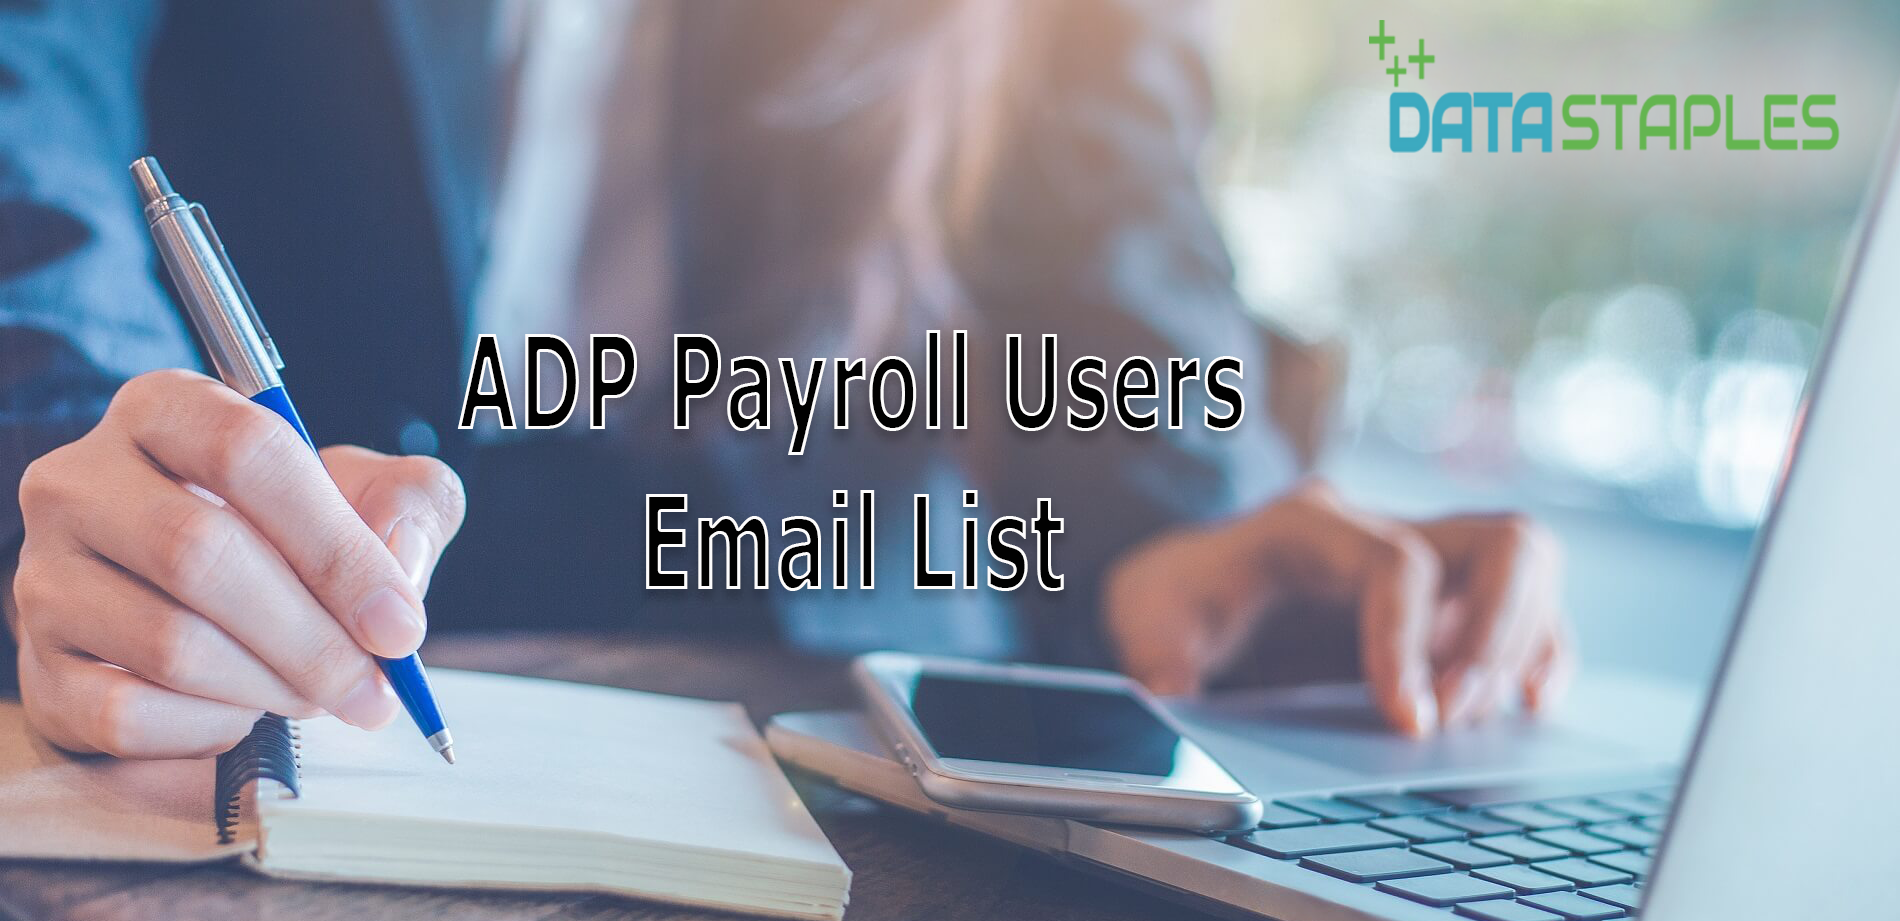 ADP Payroll Users Email List | DataStaples